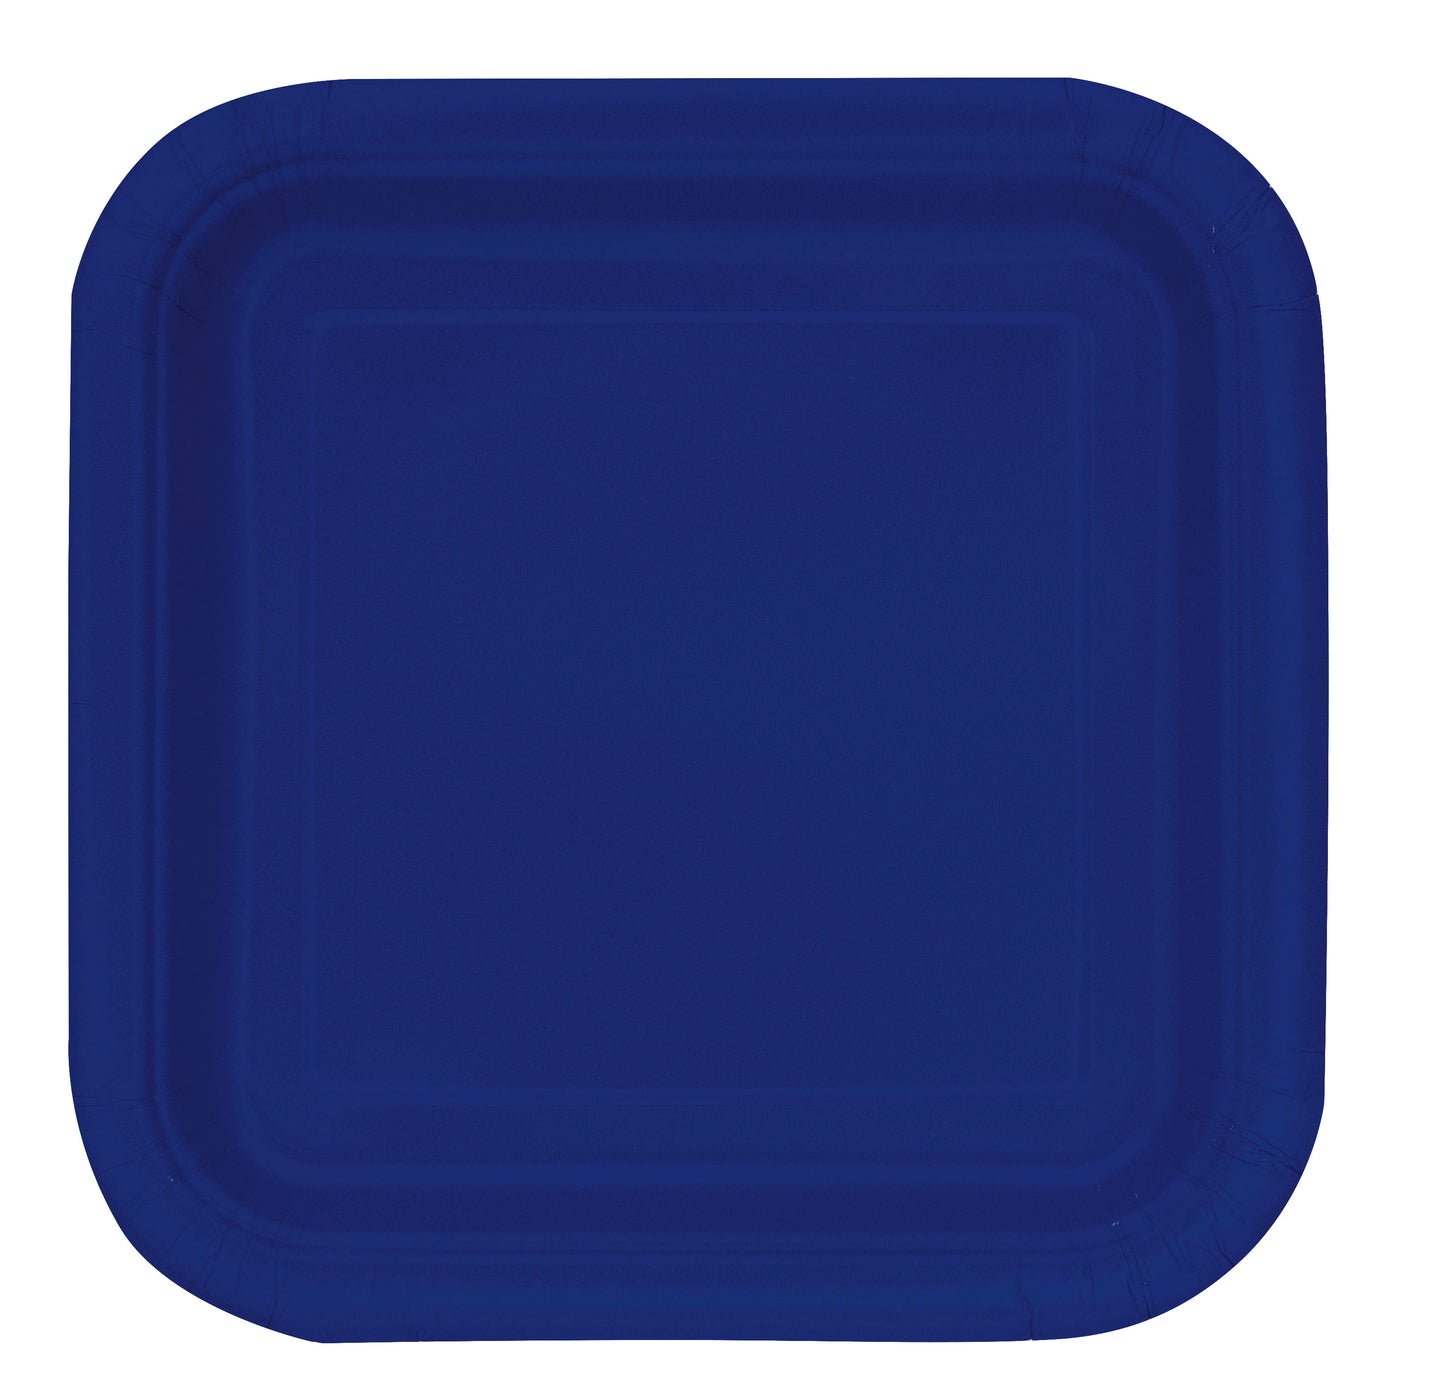 True Navy Blue Solid Square 9" Dinner Plates, 14-pc